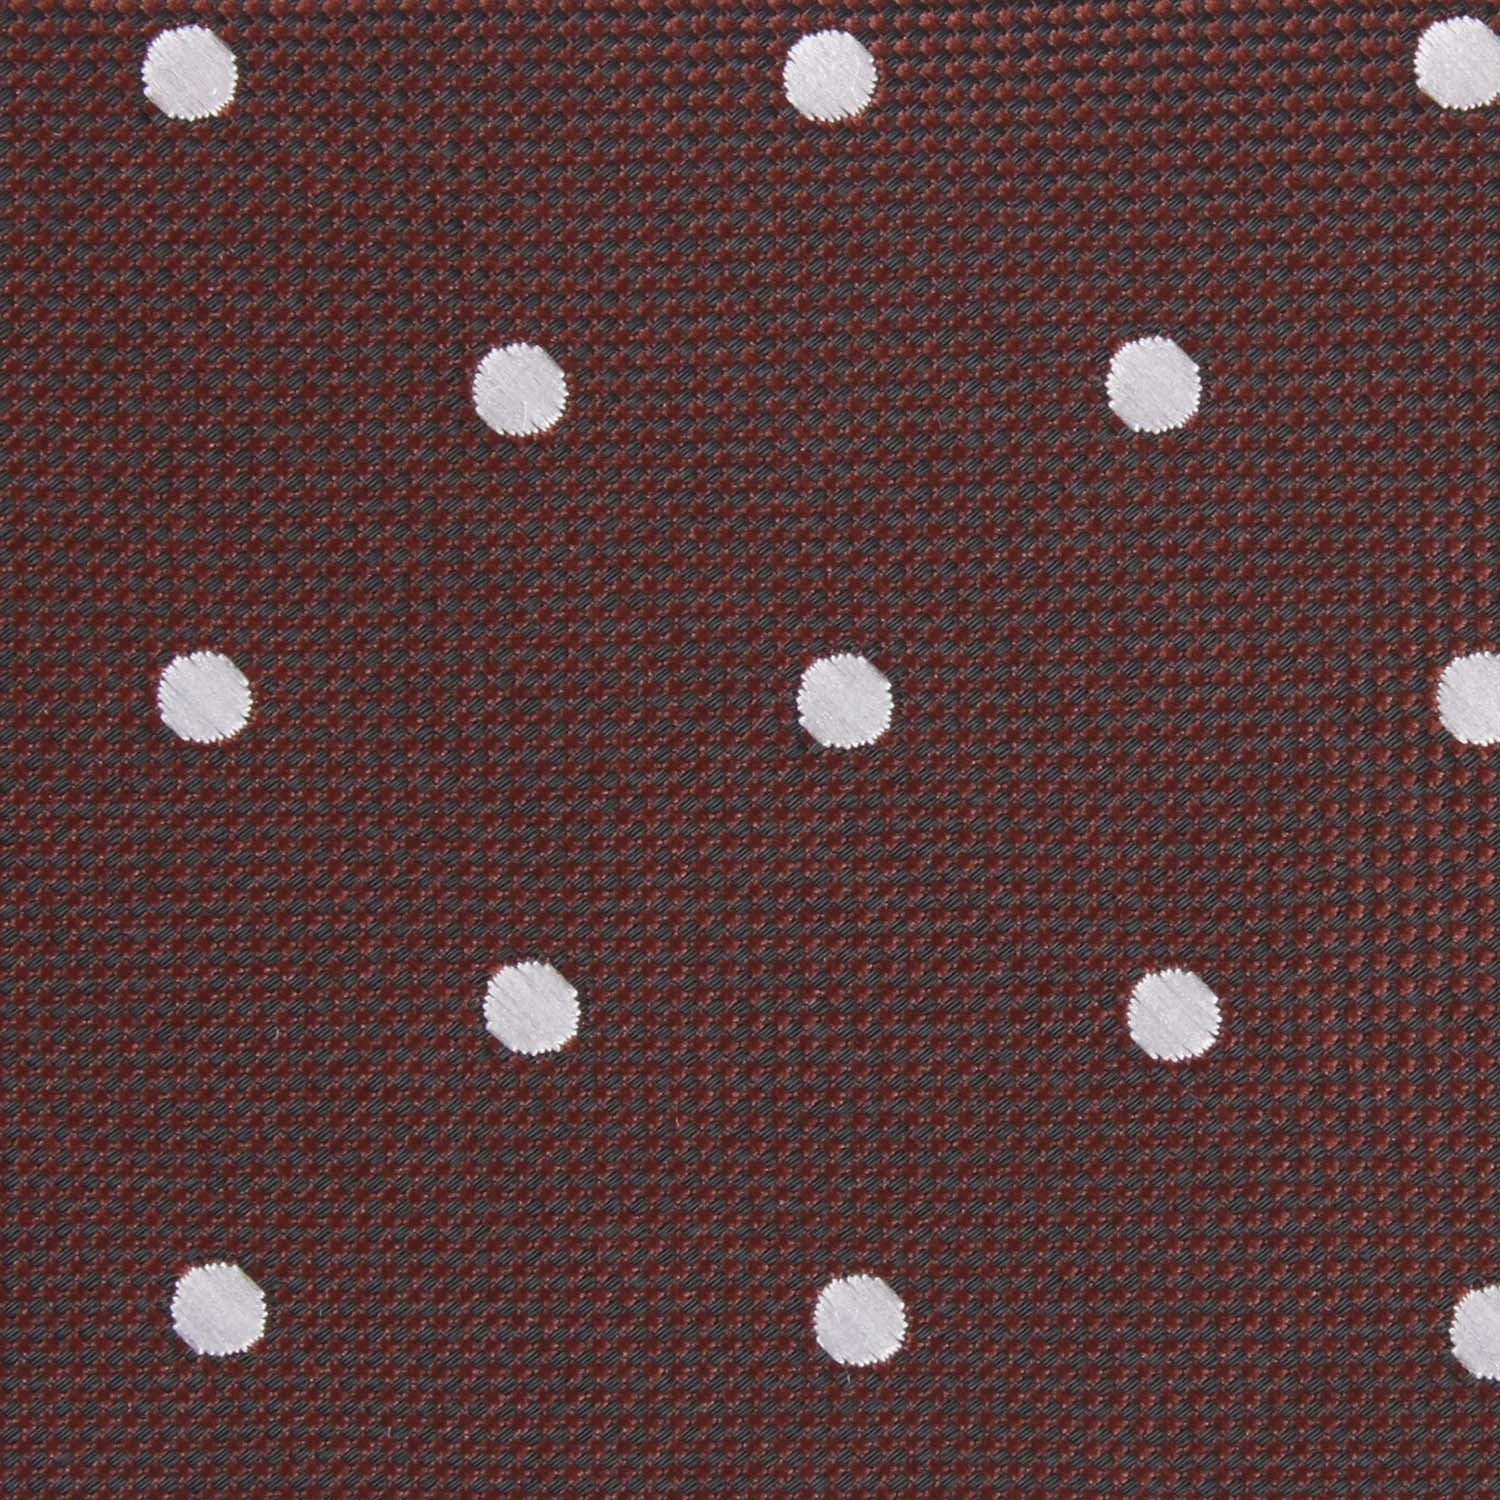 Brown with White Polka Dots Fabric Necktie M122